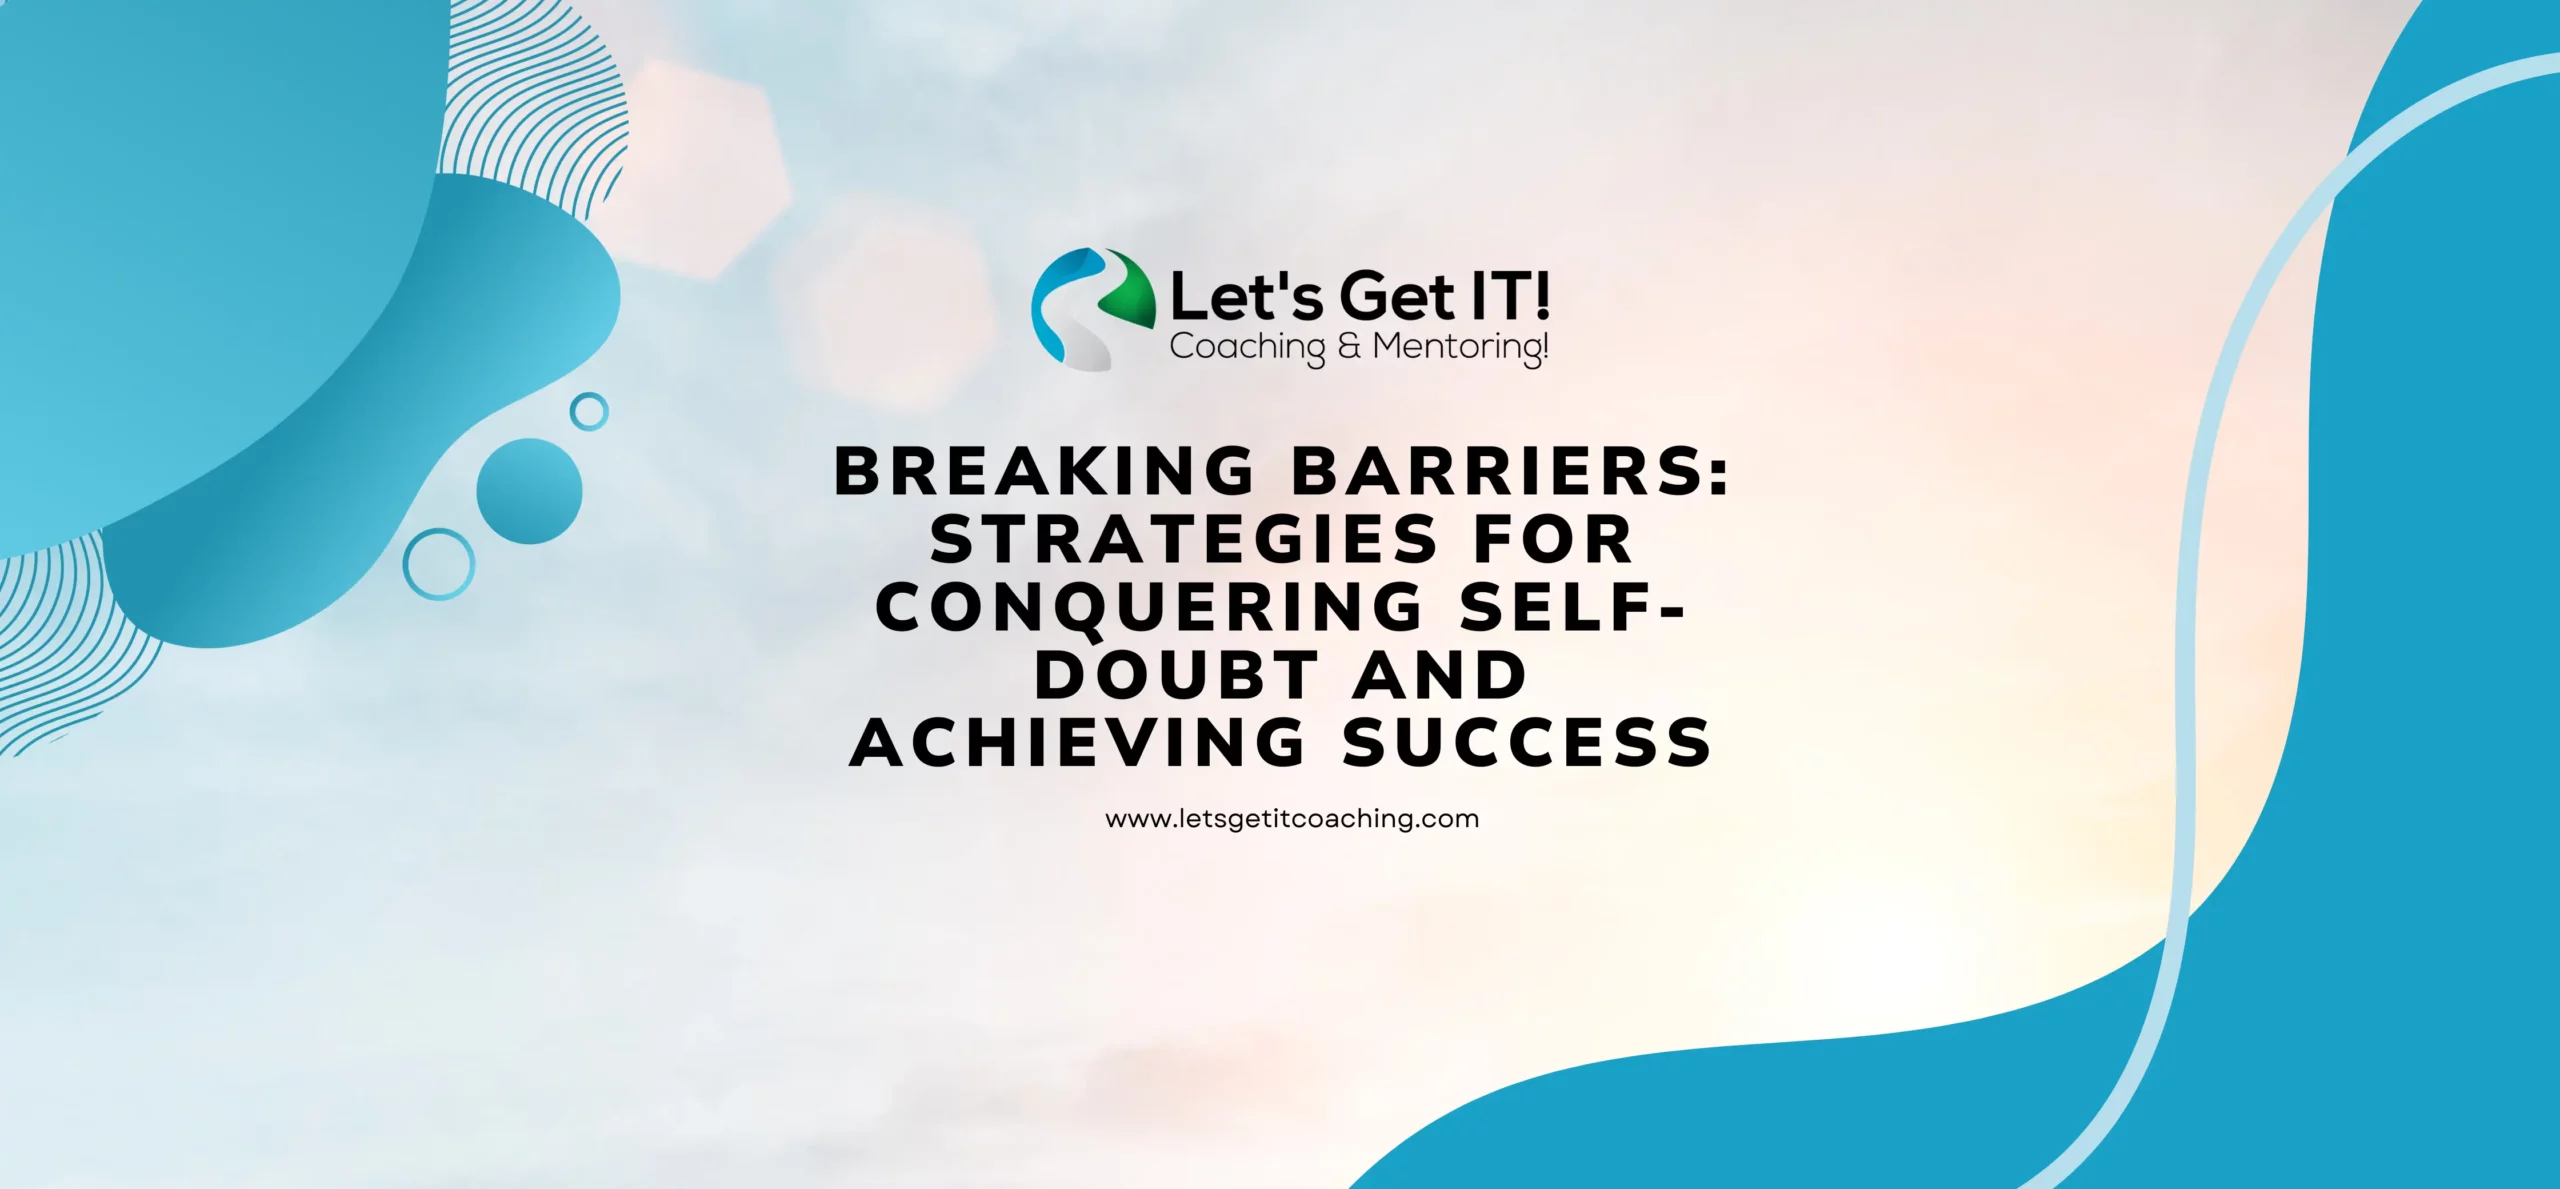 Breaking Barriers: Strategies for Conquering Self-Doubt and Achieving Success